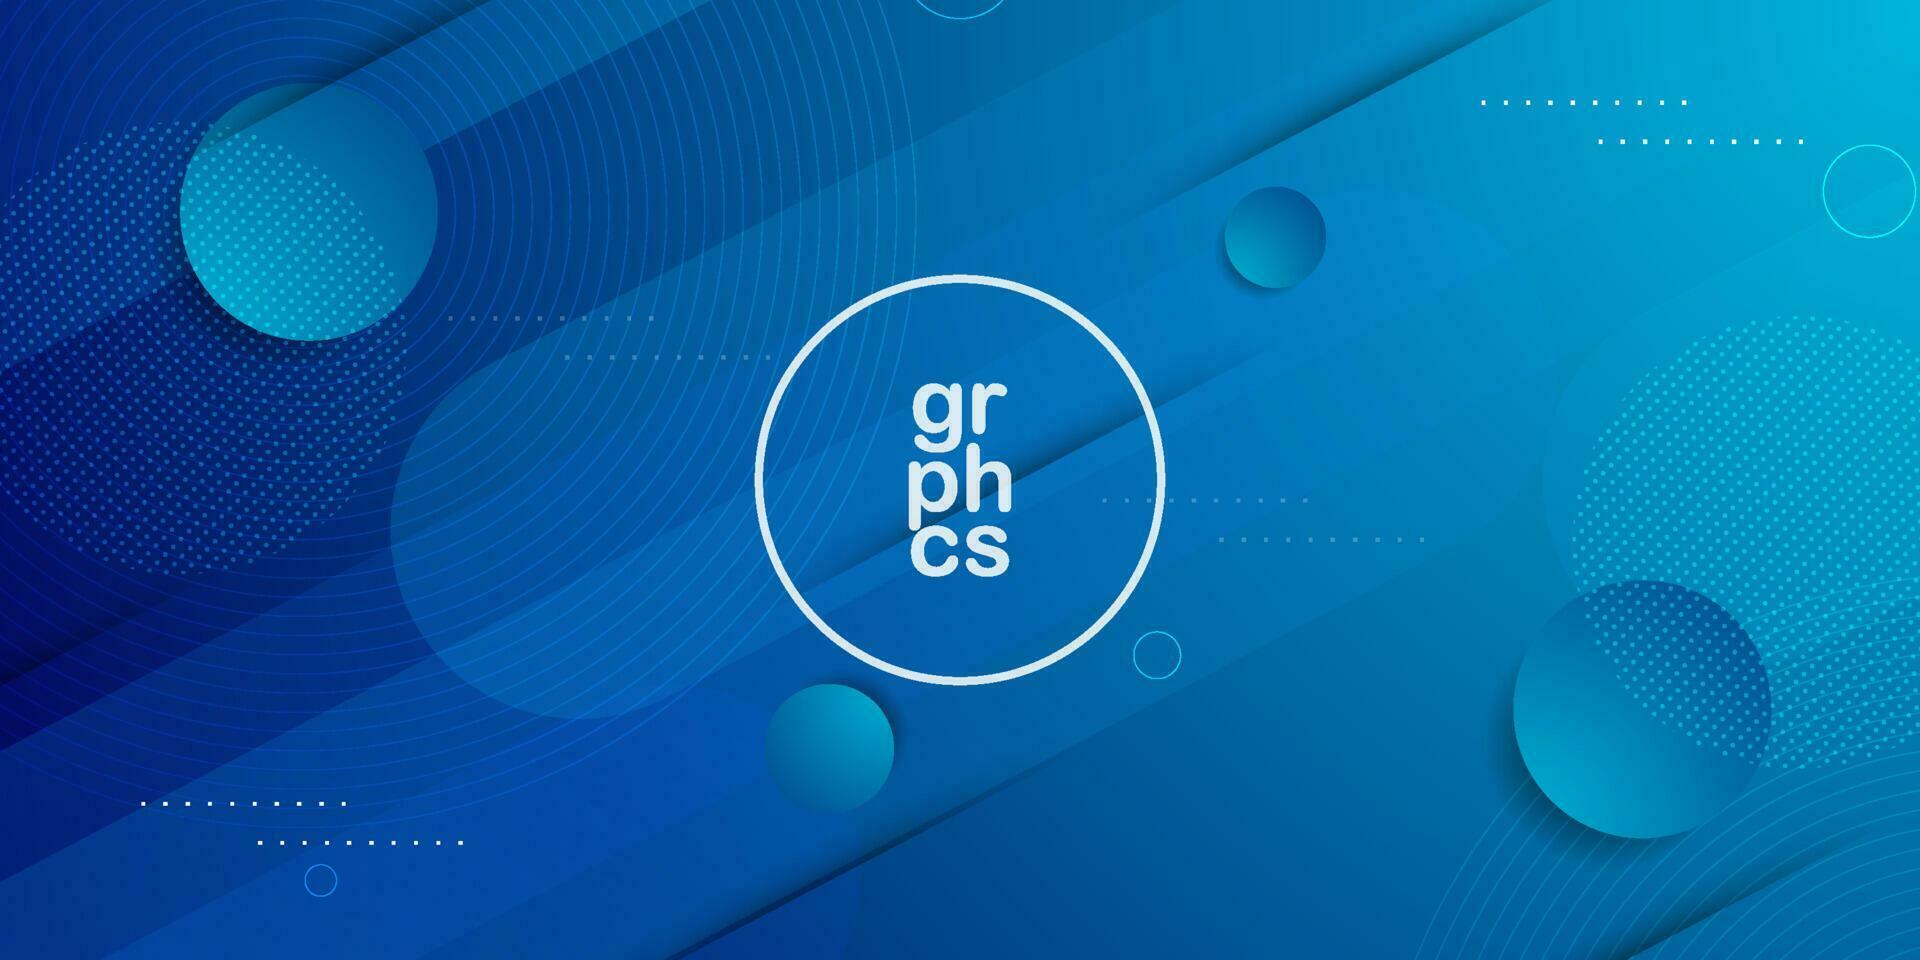 Dynamic abstract dark blue gradient illustration geometric background with simple circle pattern. cool and smart design.Eps10 vector